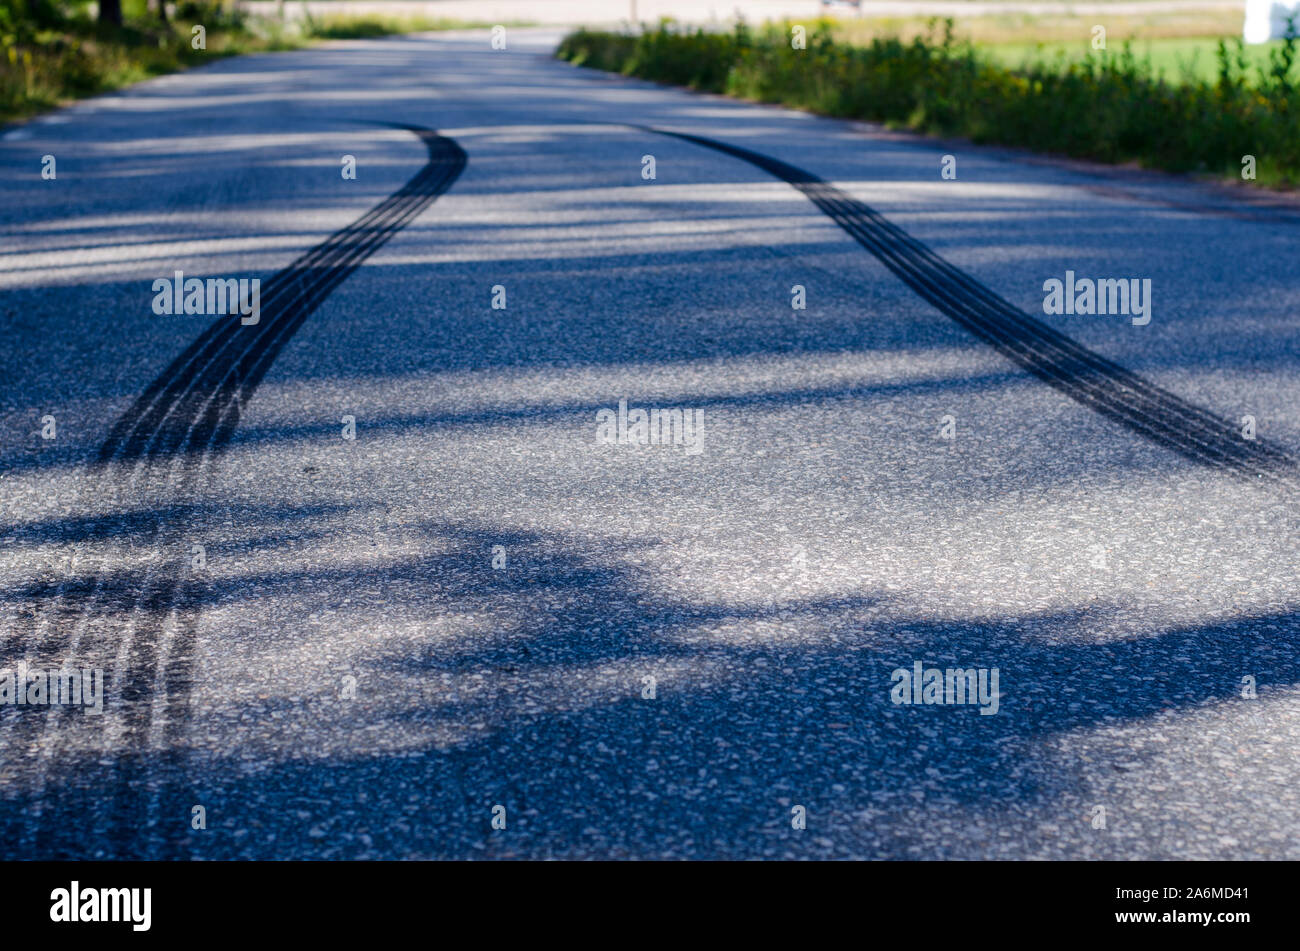 Skidmarks after a sudden braking on a narrow road with asphalt surface. Stock Photo